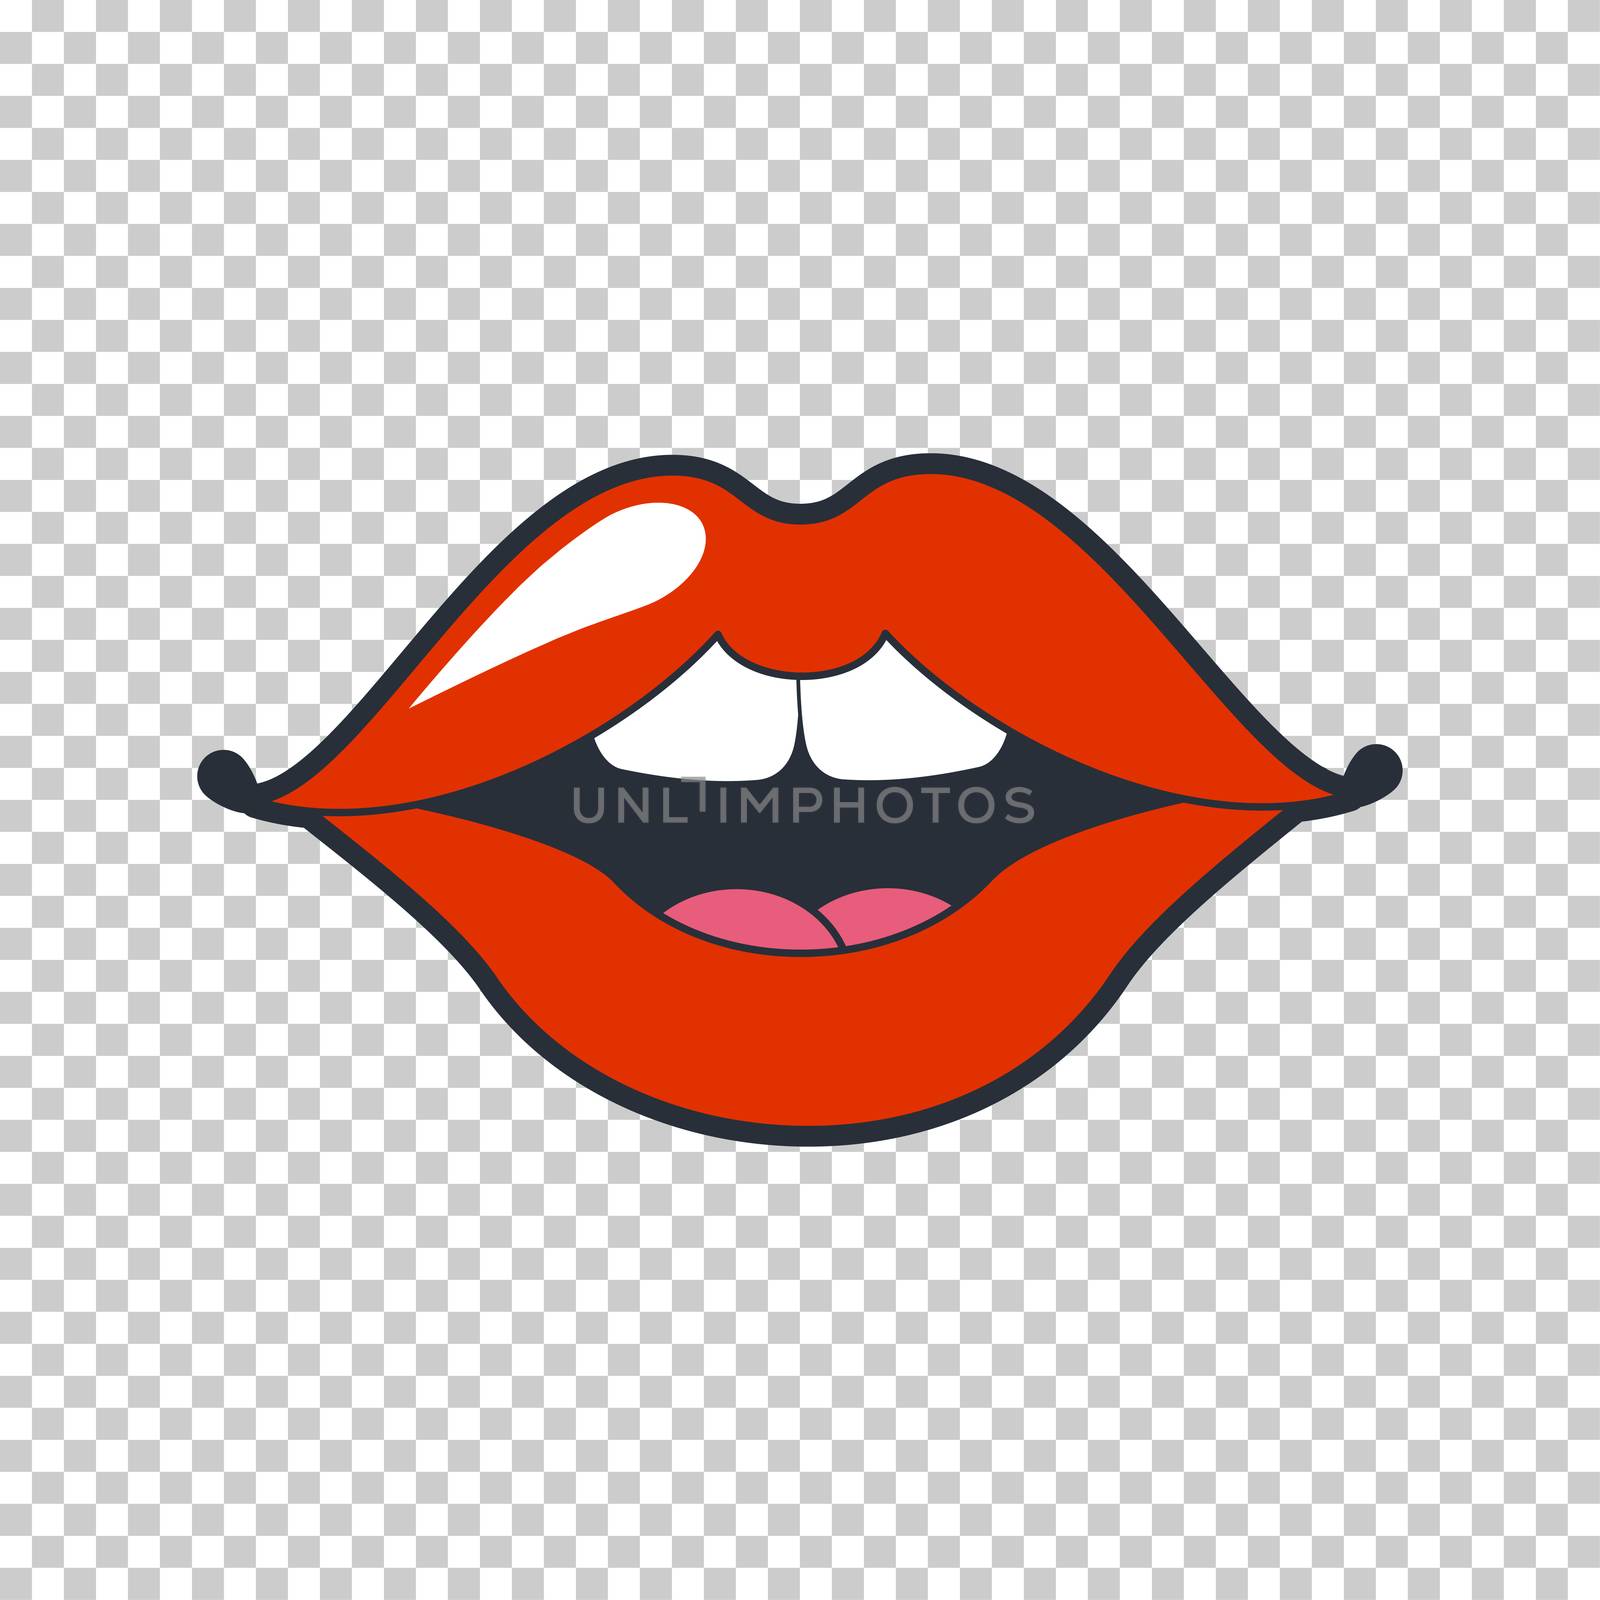 Lips kiss. patch, sticker isolated on white. Cool sexy red kissed. Selphie cartoon Sign for print, in comics, Fashion, pop art, retro style 80-s 90s by Elena_Garder